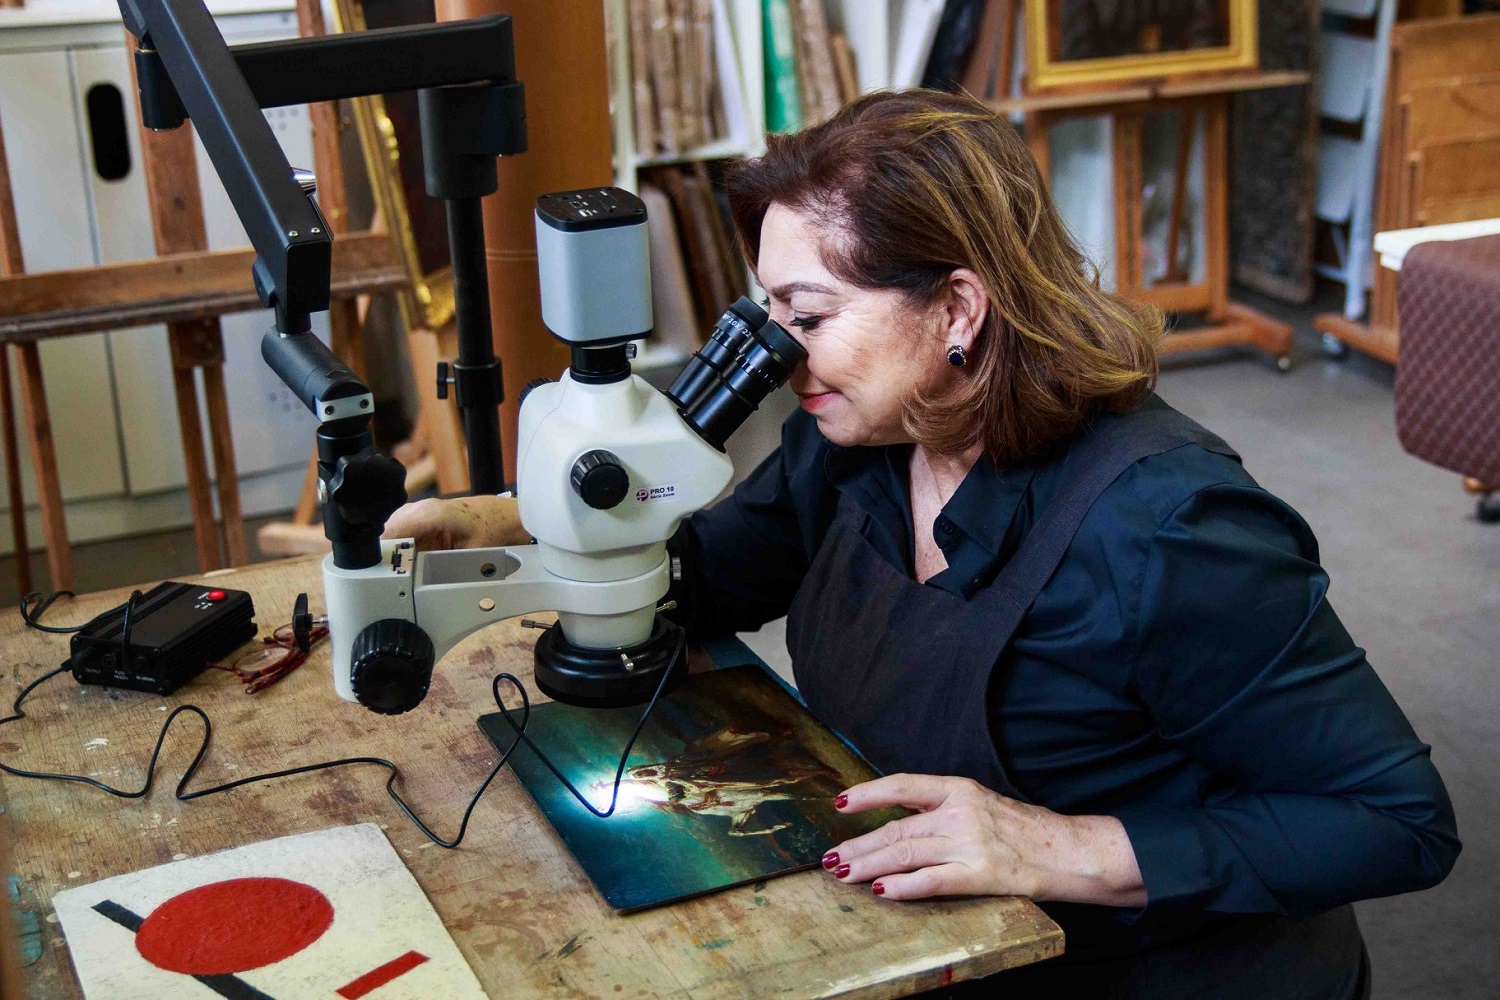 Art restorer, a profession for experts, scholars and the curious